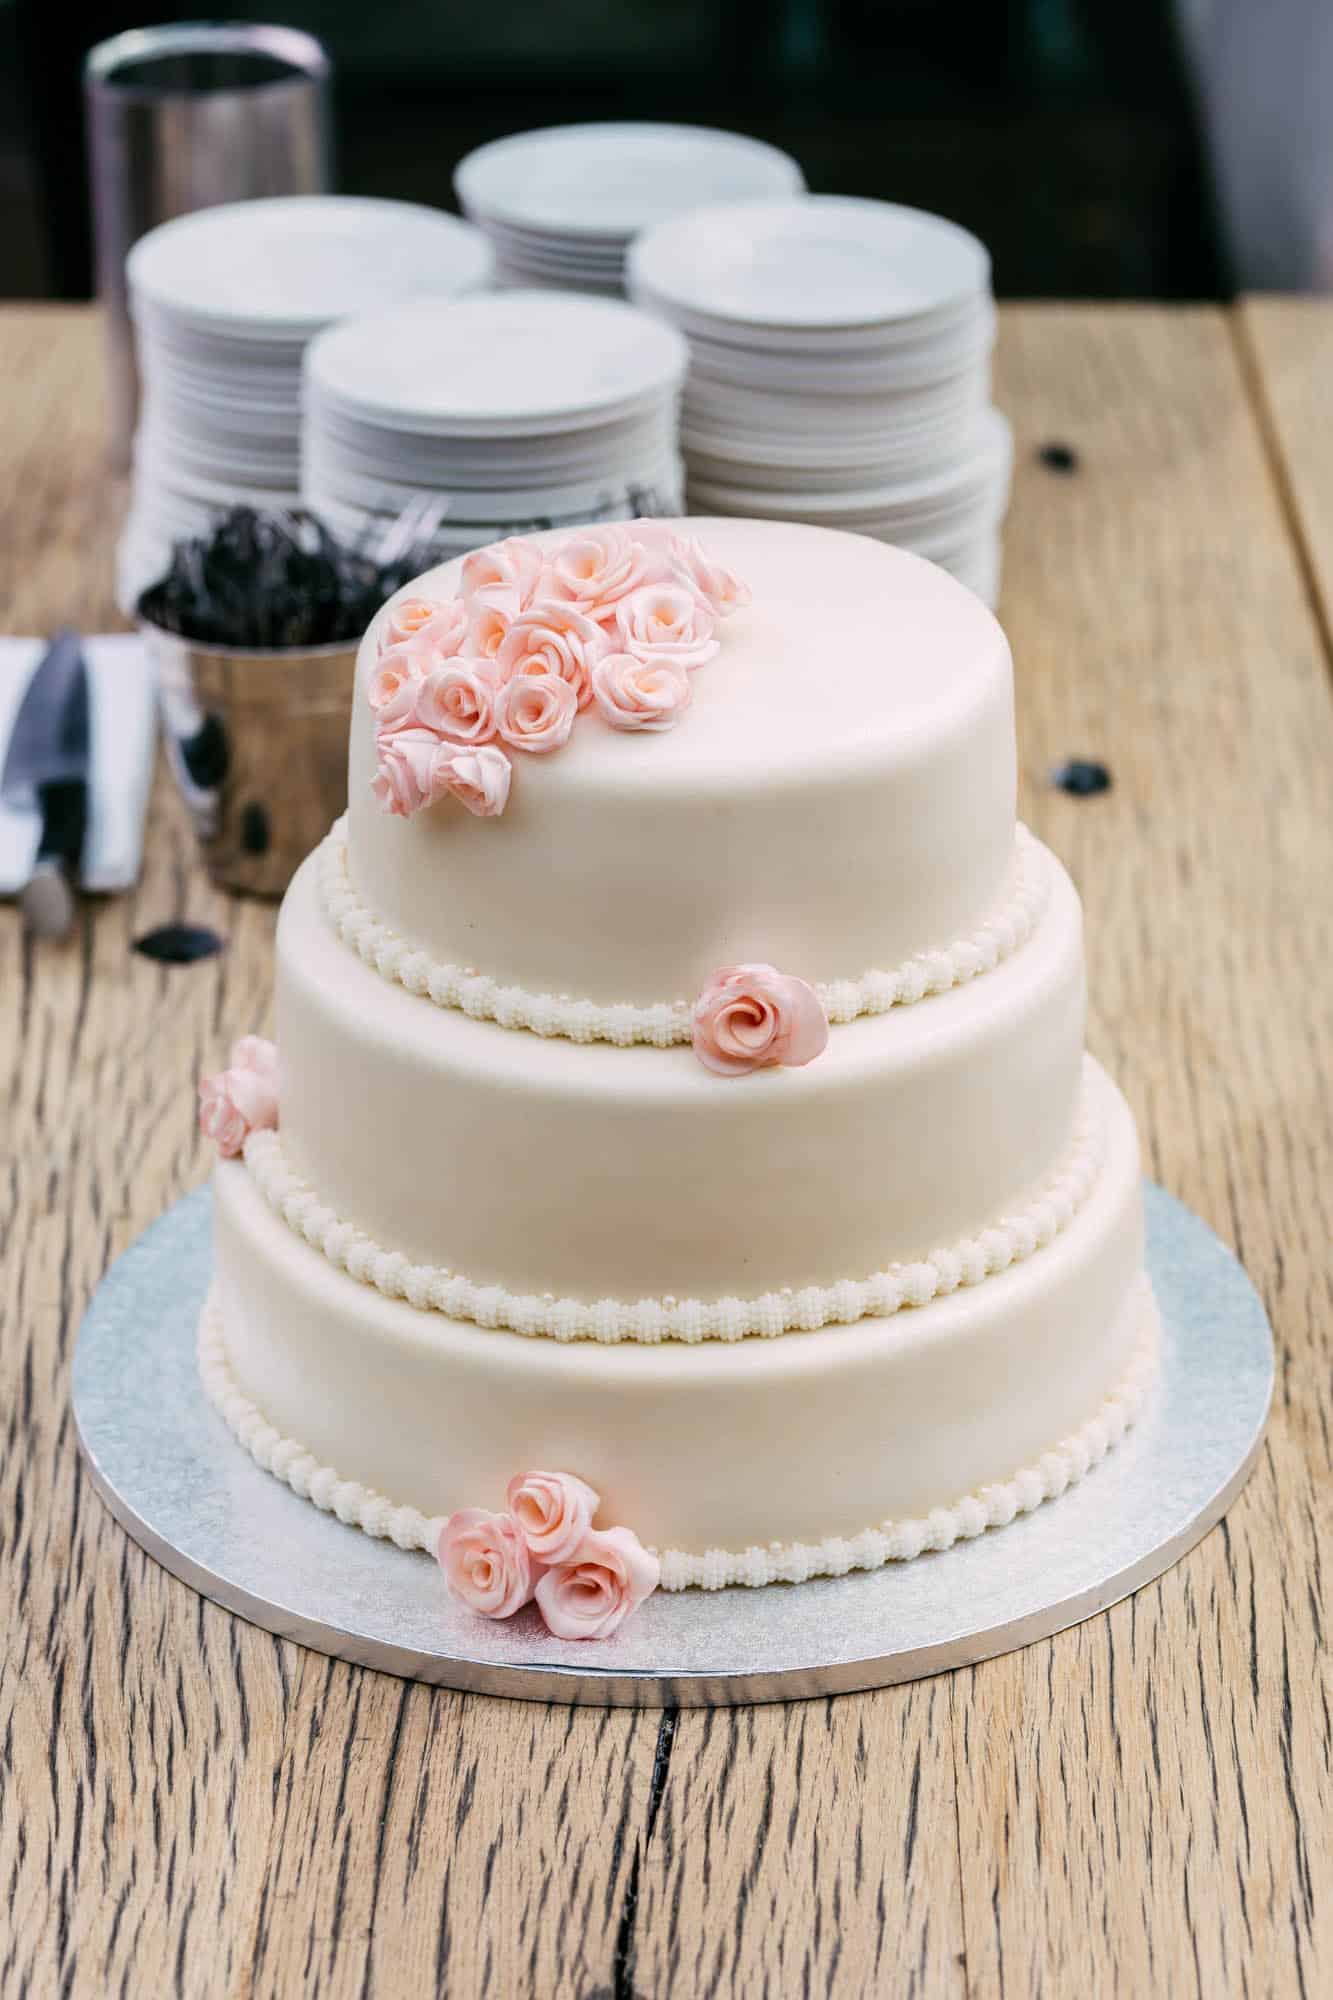 A white wedding cake decorated with pink roses on top.